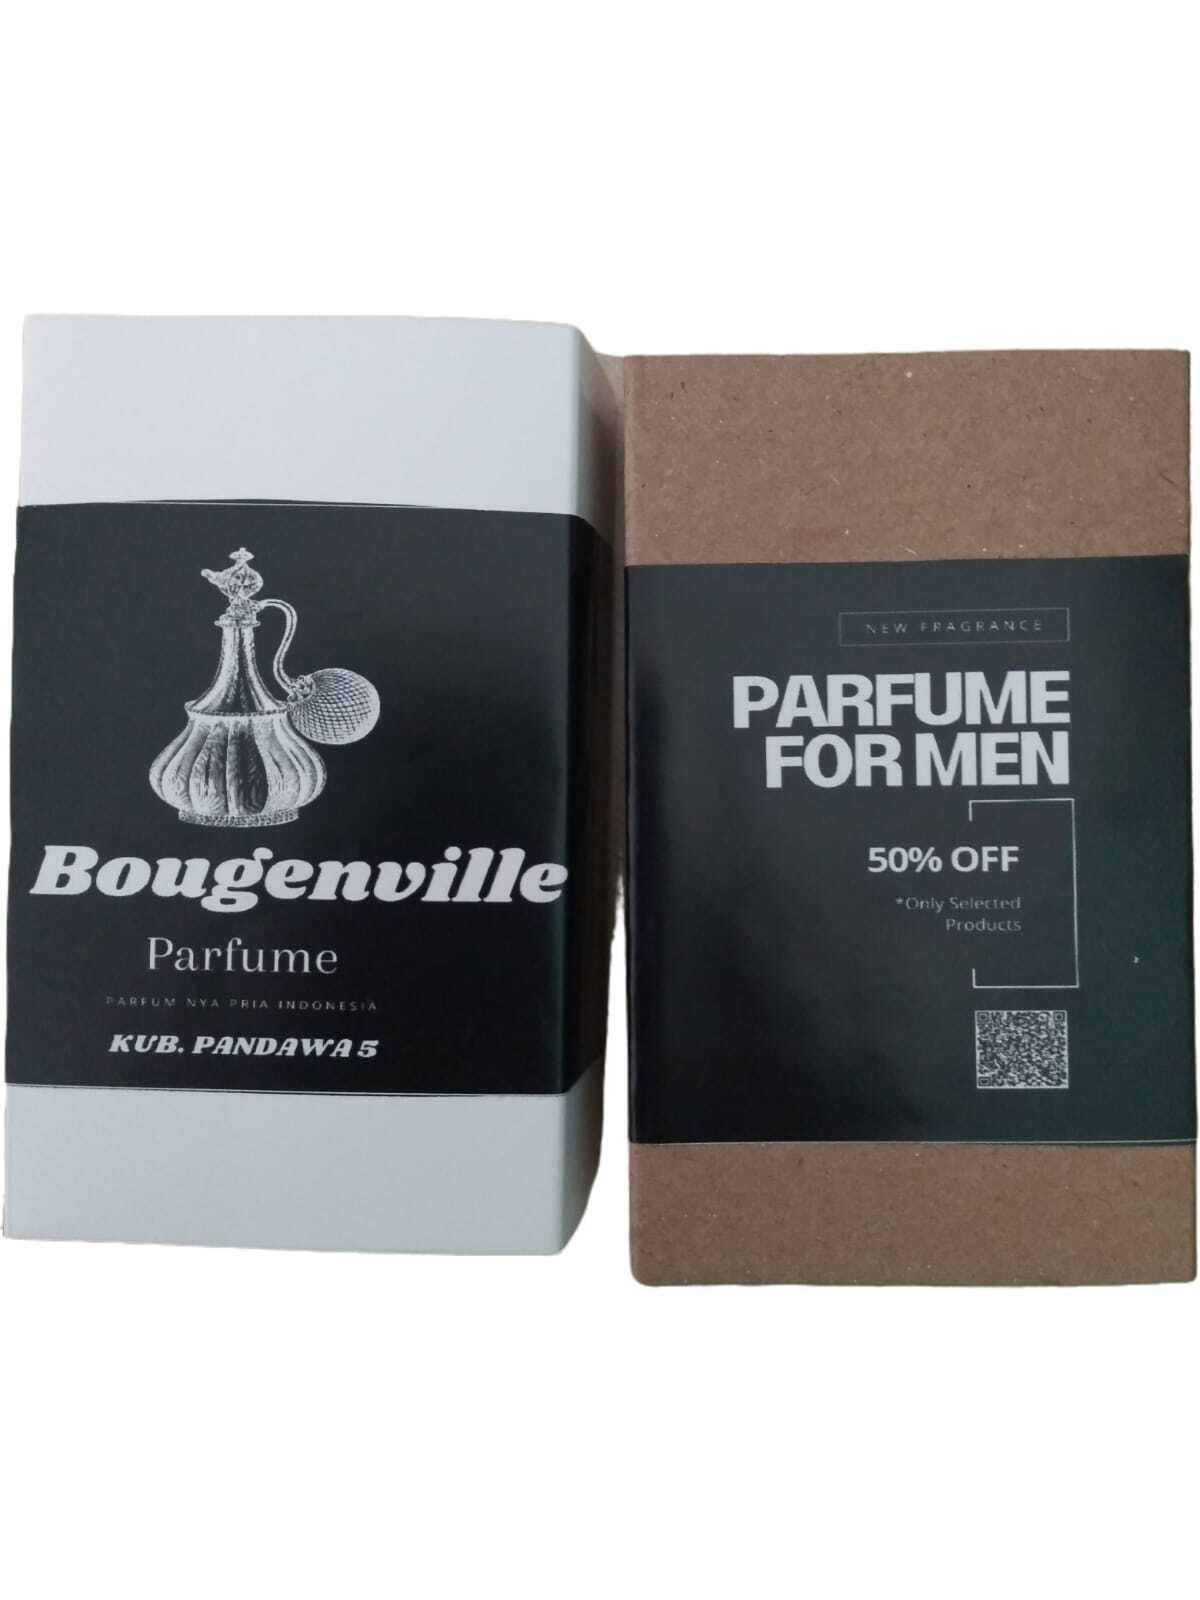 BOUGENVILLE PERFUME